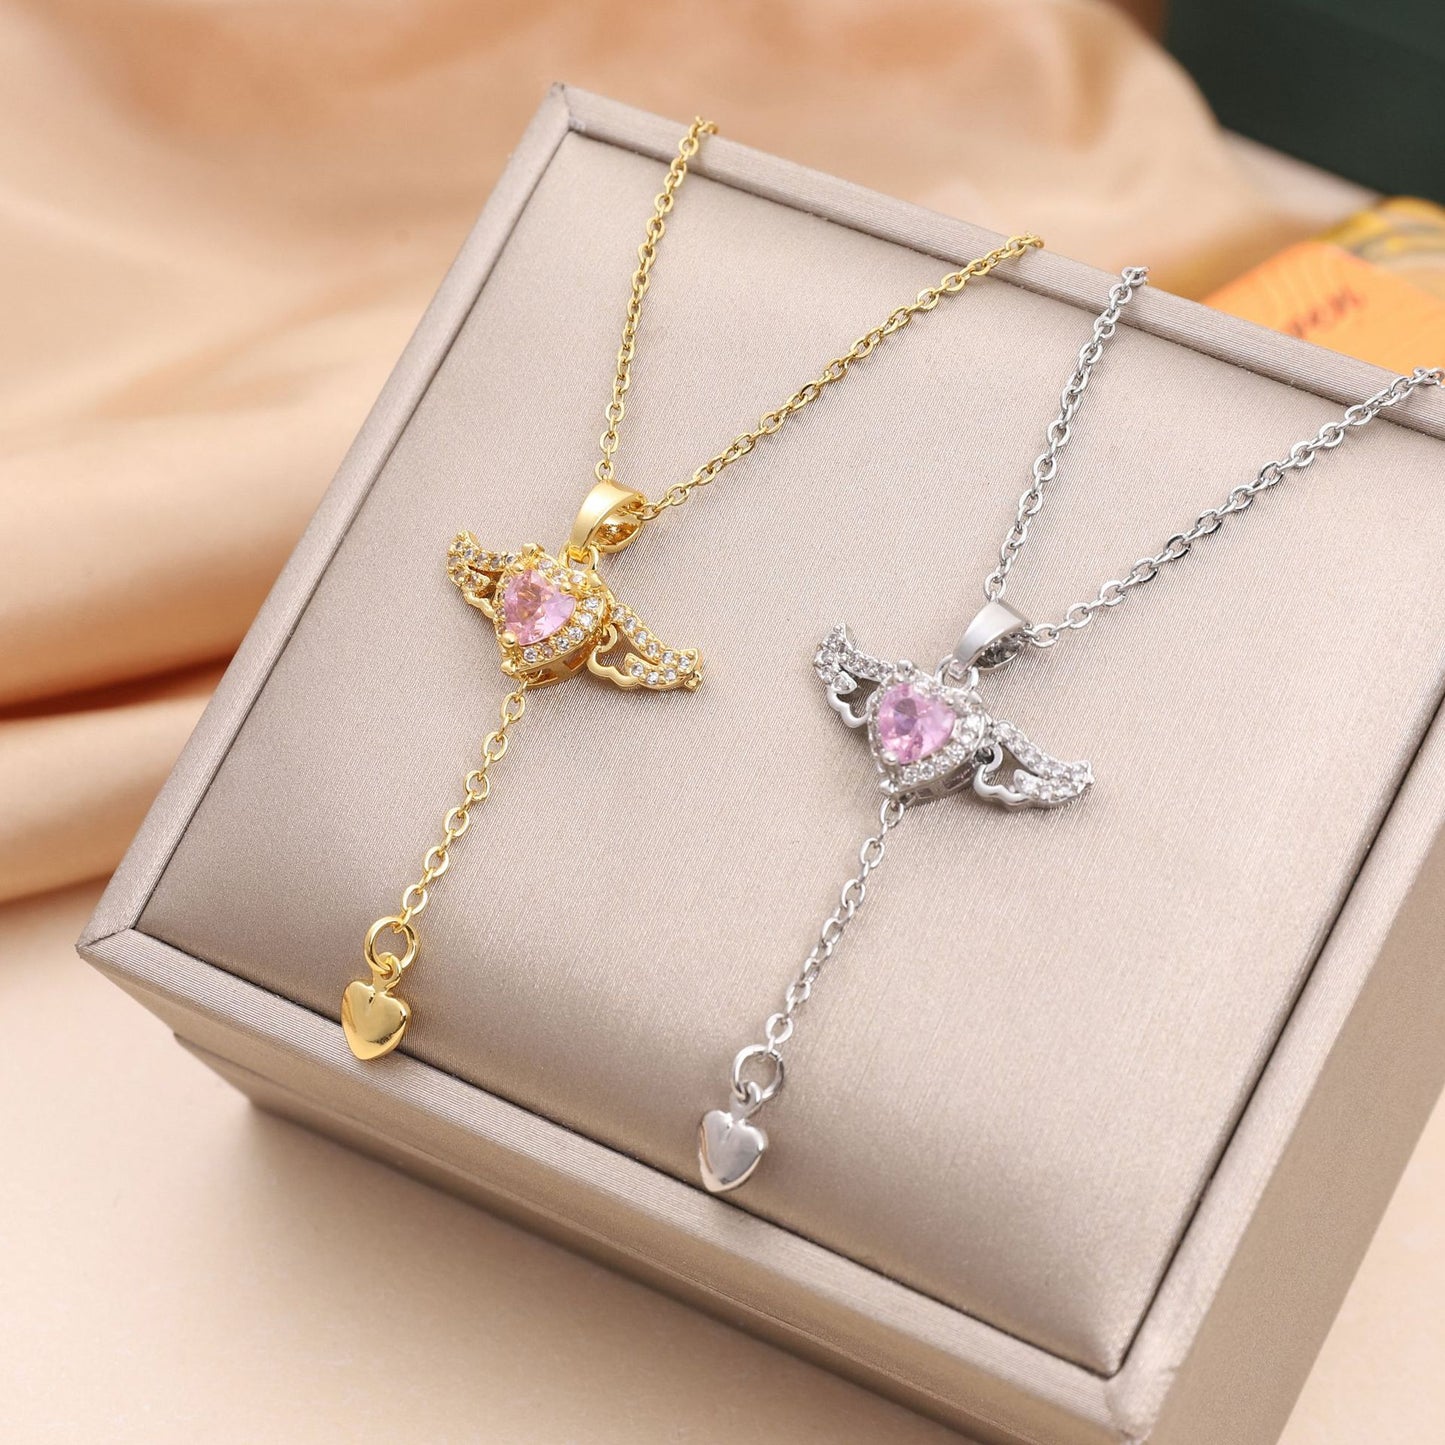 Cupid Heart Angel Wings Tassel Necklace Clavicle Chain Women Jewelry Gift Valentine's Day